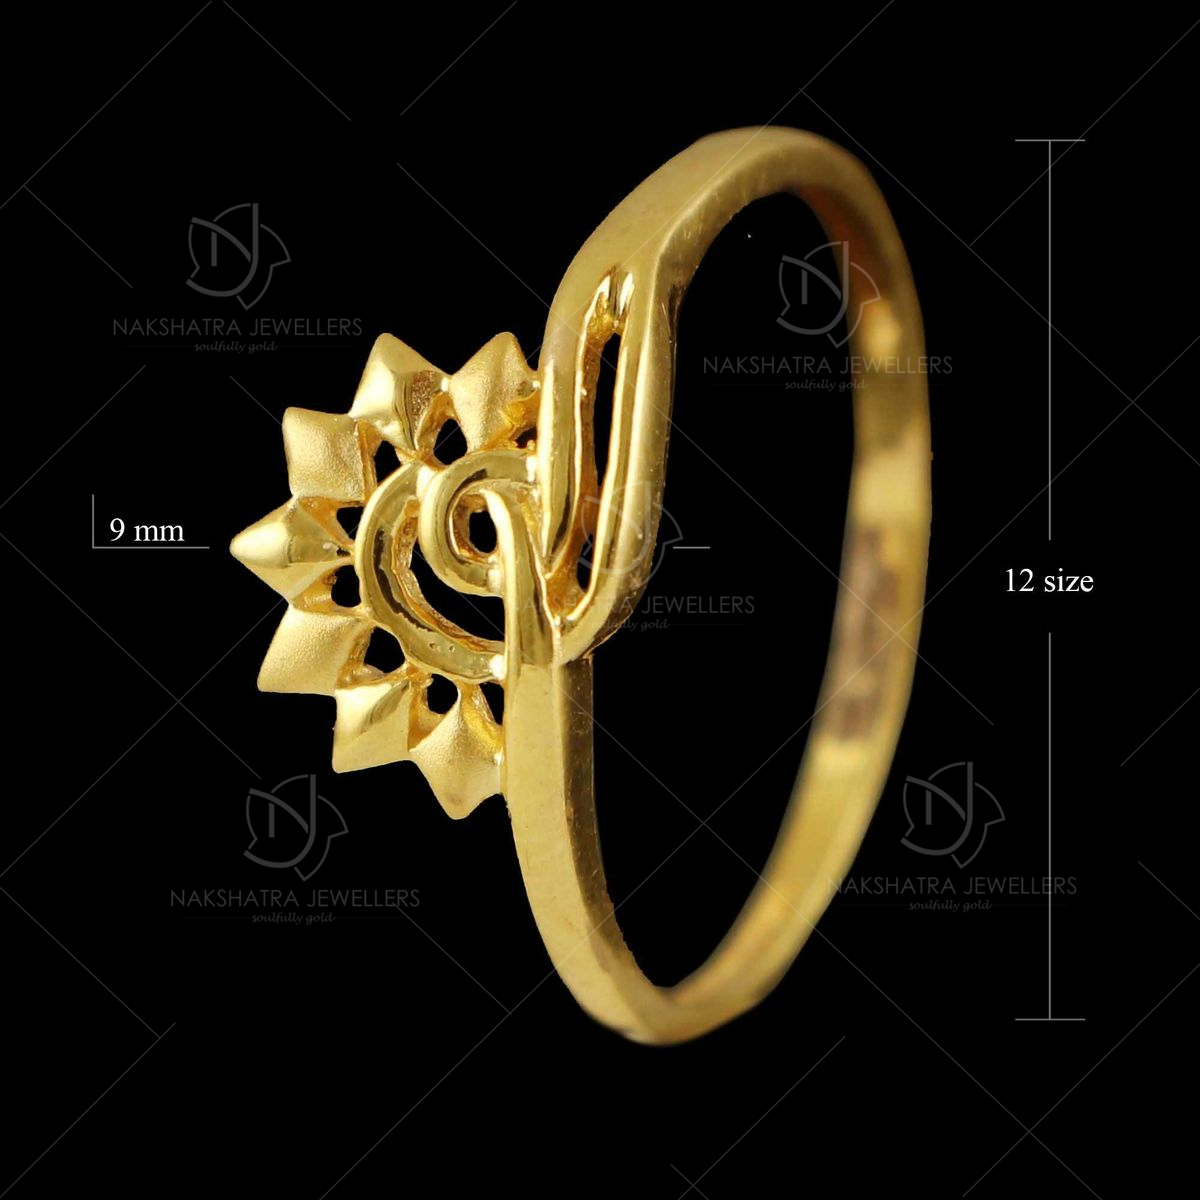 Buy quality casting ring in Ahmedabad